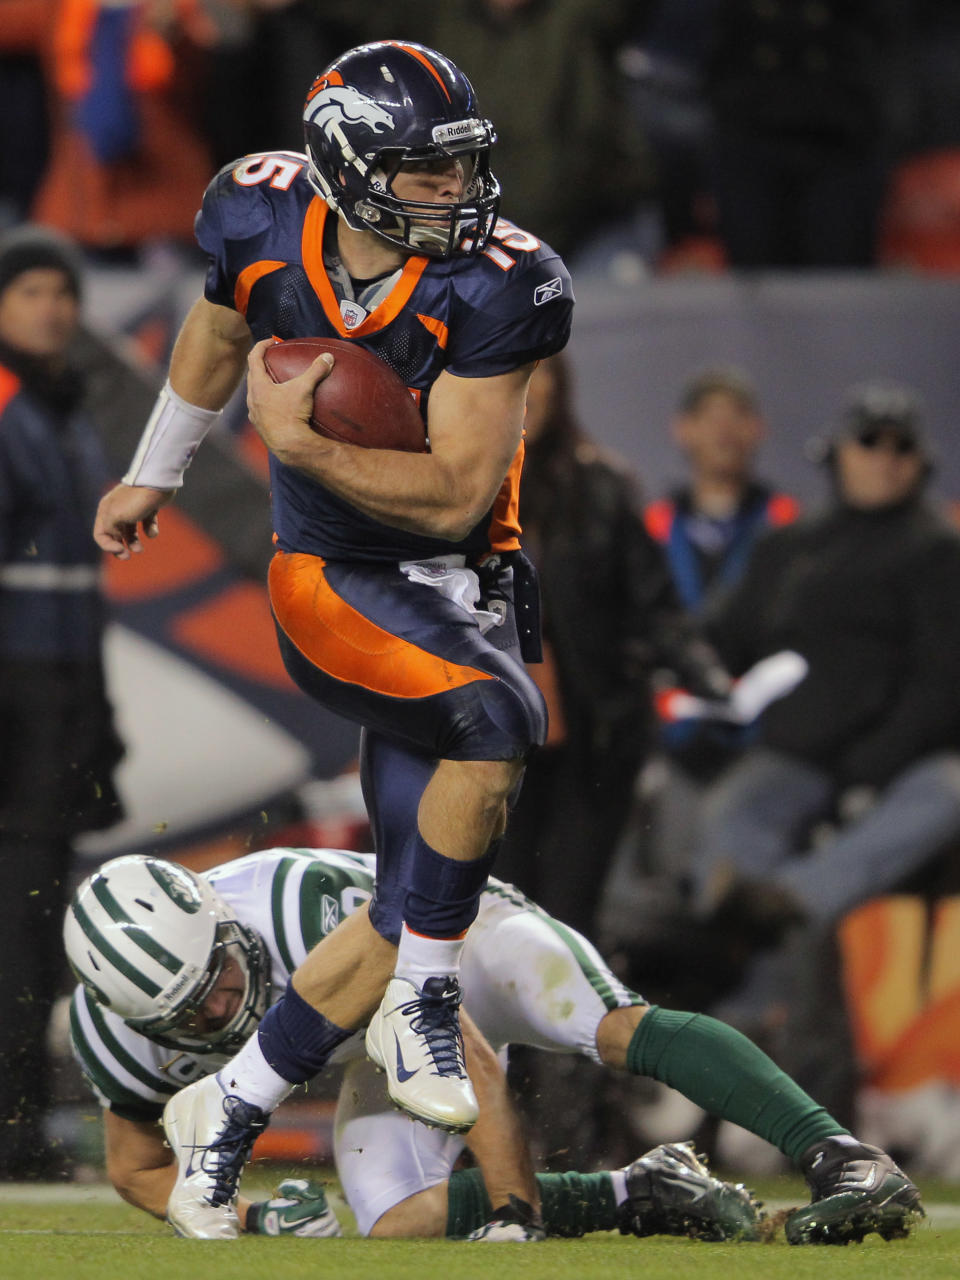 DENVER, CO - NOVEMBER 17: Quarterback Tim Tebow #15 of the Denver Broncos eludes Eric Smith #33 of the New York Jets and rushes 20 yards for the game winning touchdown in the fourth quarter at Sports Authority Field at Mile High on November 17, 2011 in Denver, Colorado. The Broncos defeated the Jets 17-13. (Photo by Doug Pensinger/Getty Images)